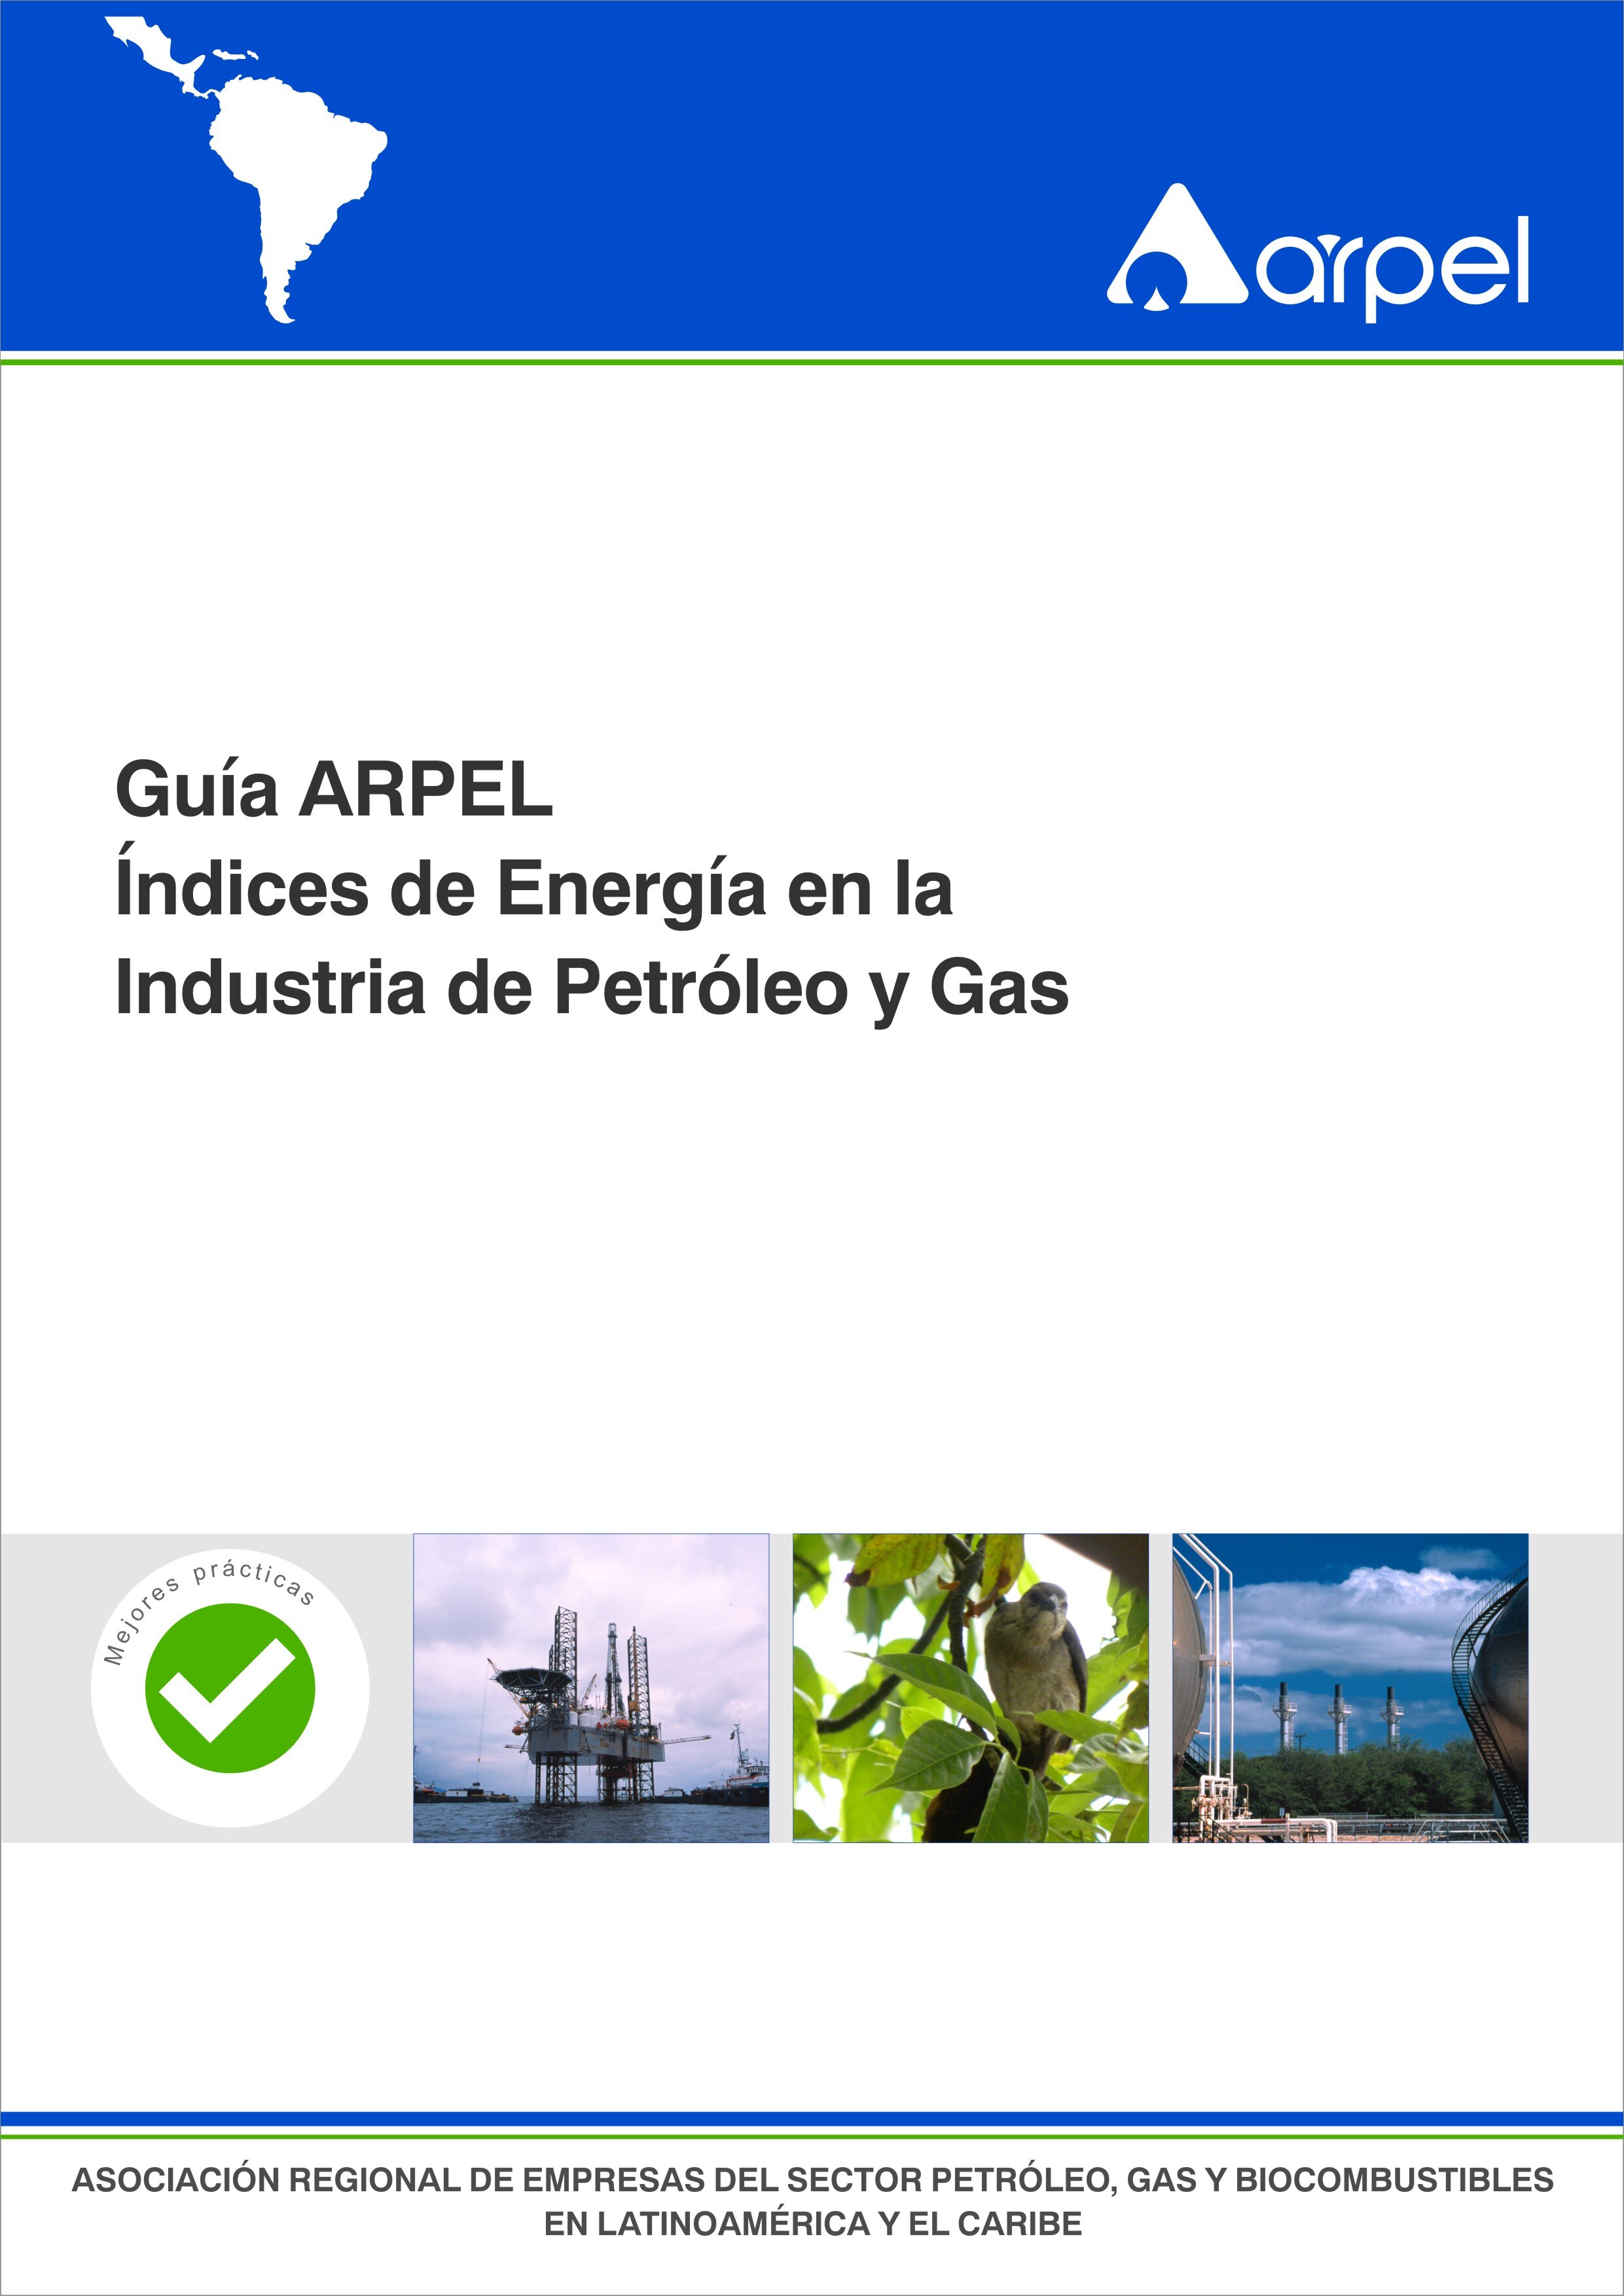 Energy Indicators in the oil and gas industry